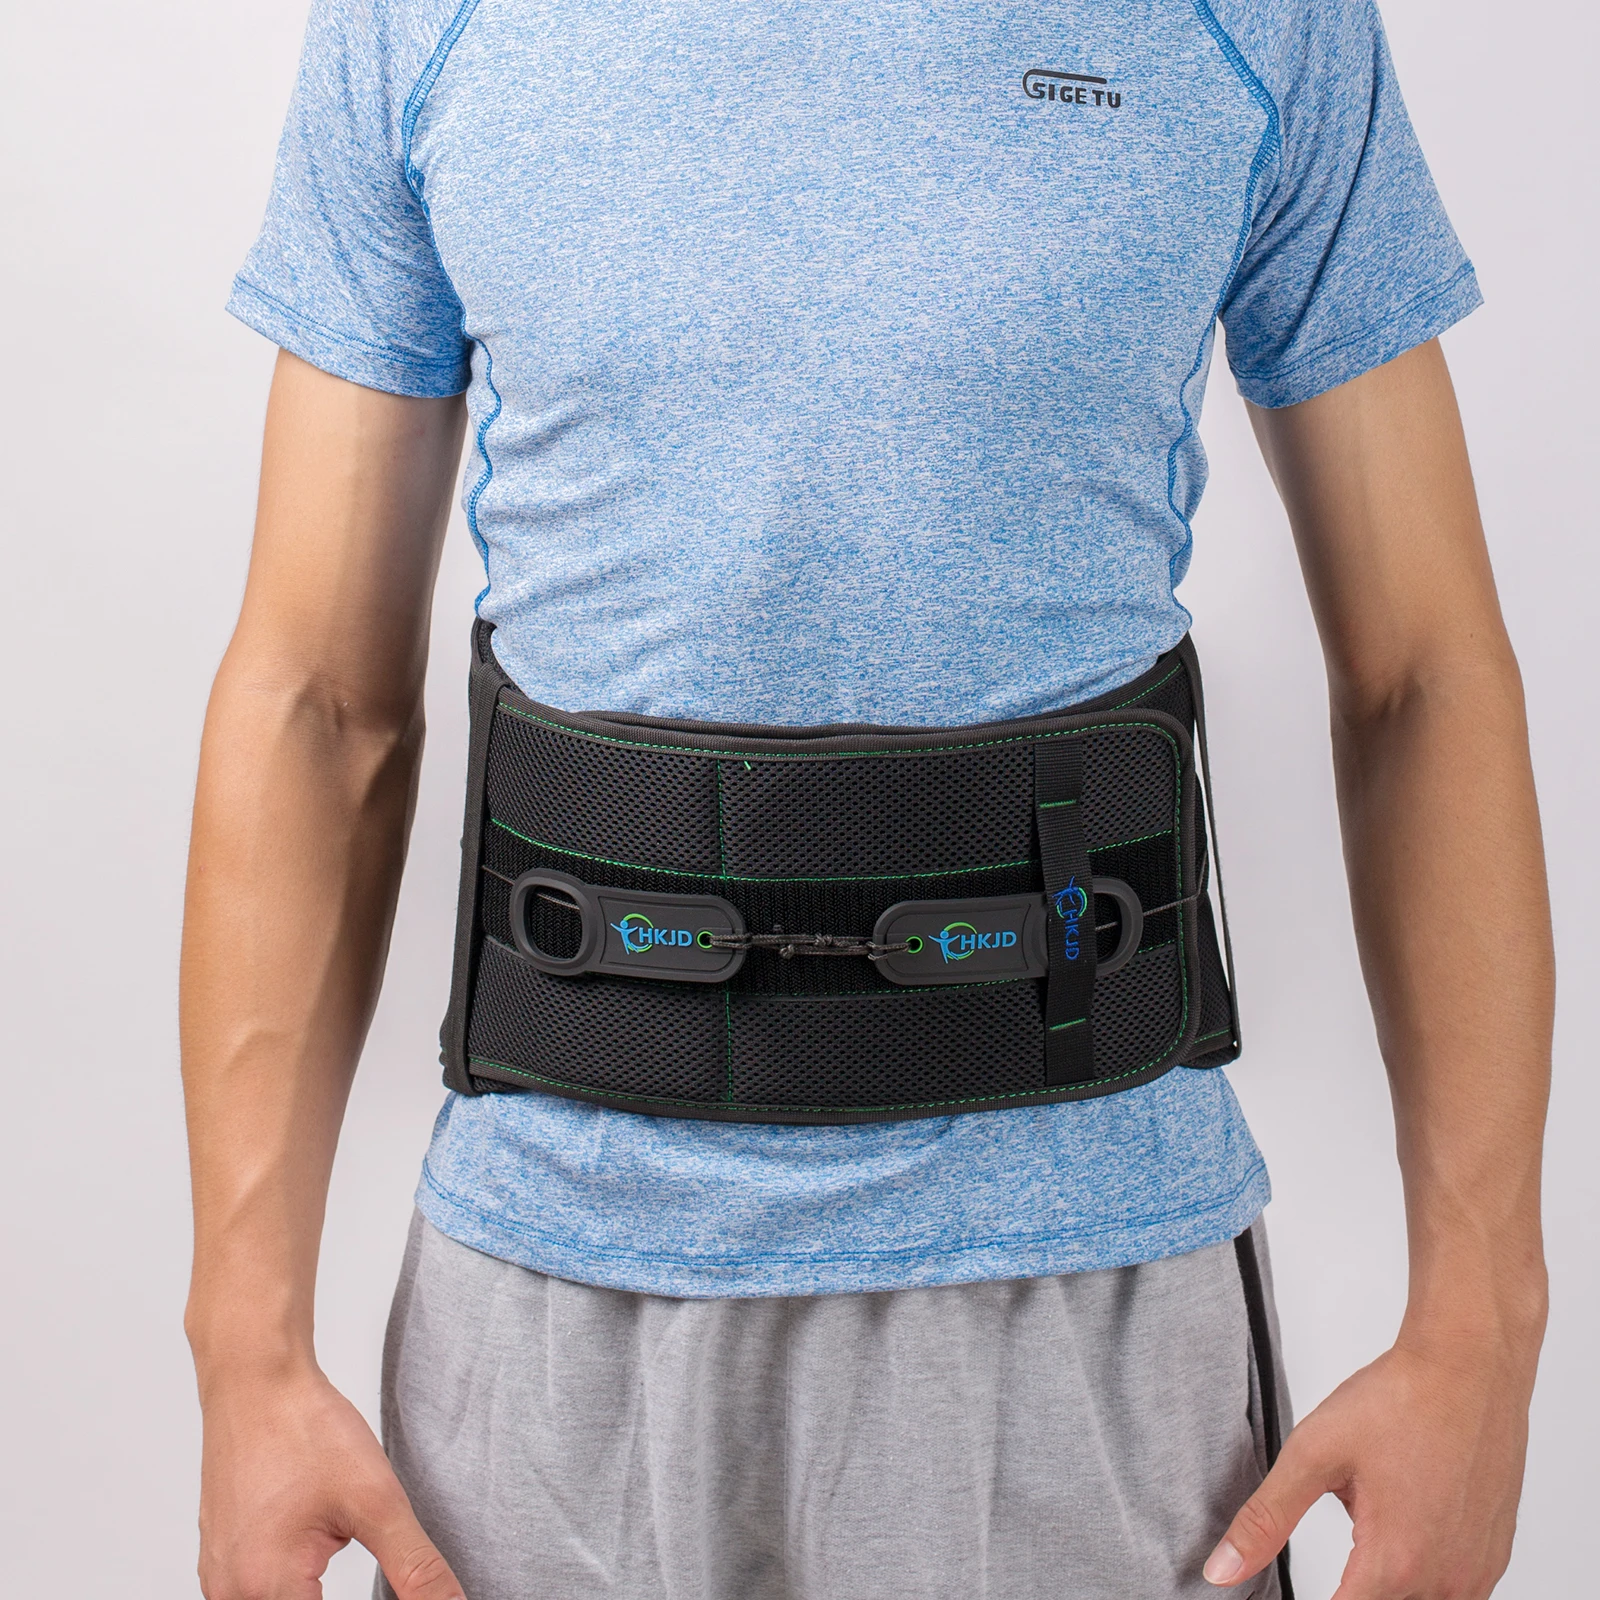 

HKJD LSO Higher Waist Medical Back Brace Lumbar Support Orthosis with Dual-Pulley System, Comfortable&Breathable&Supportive